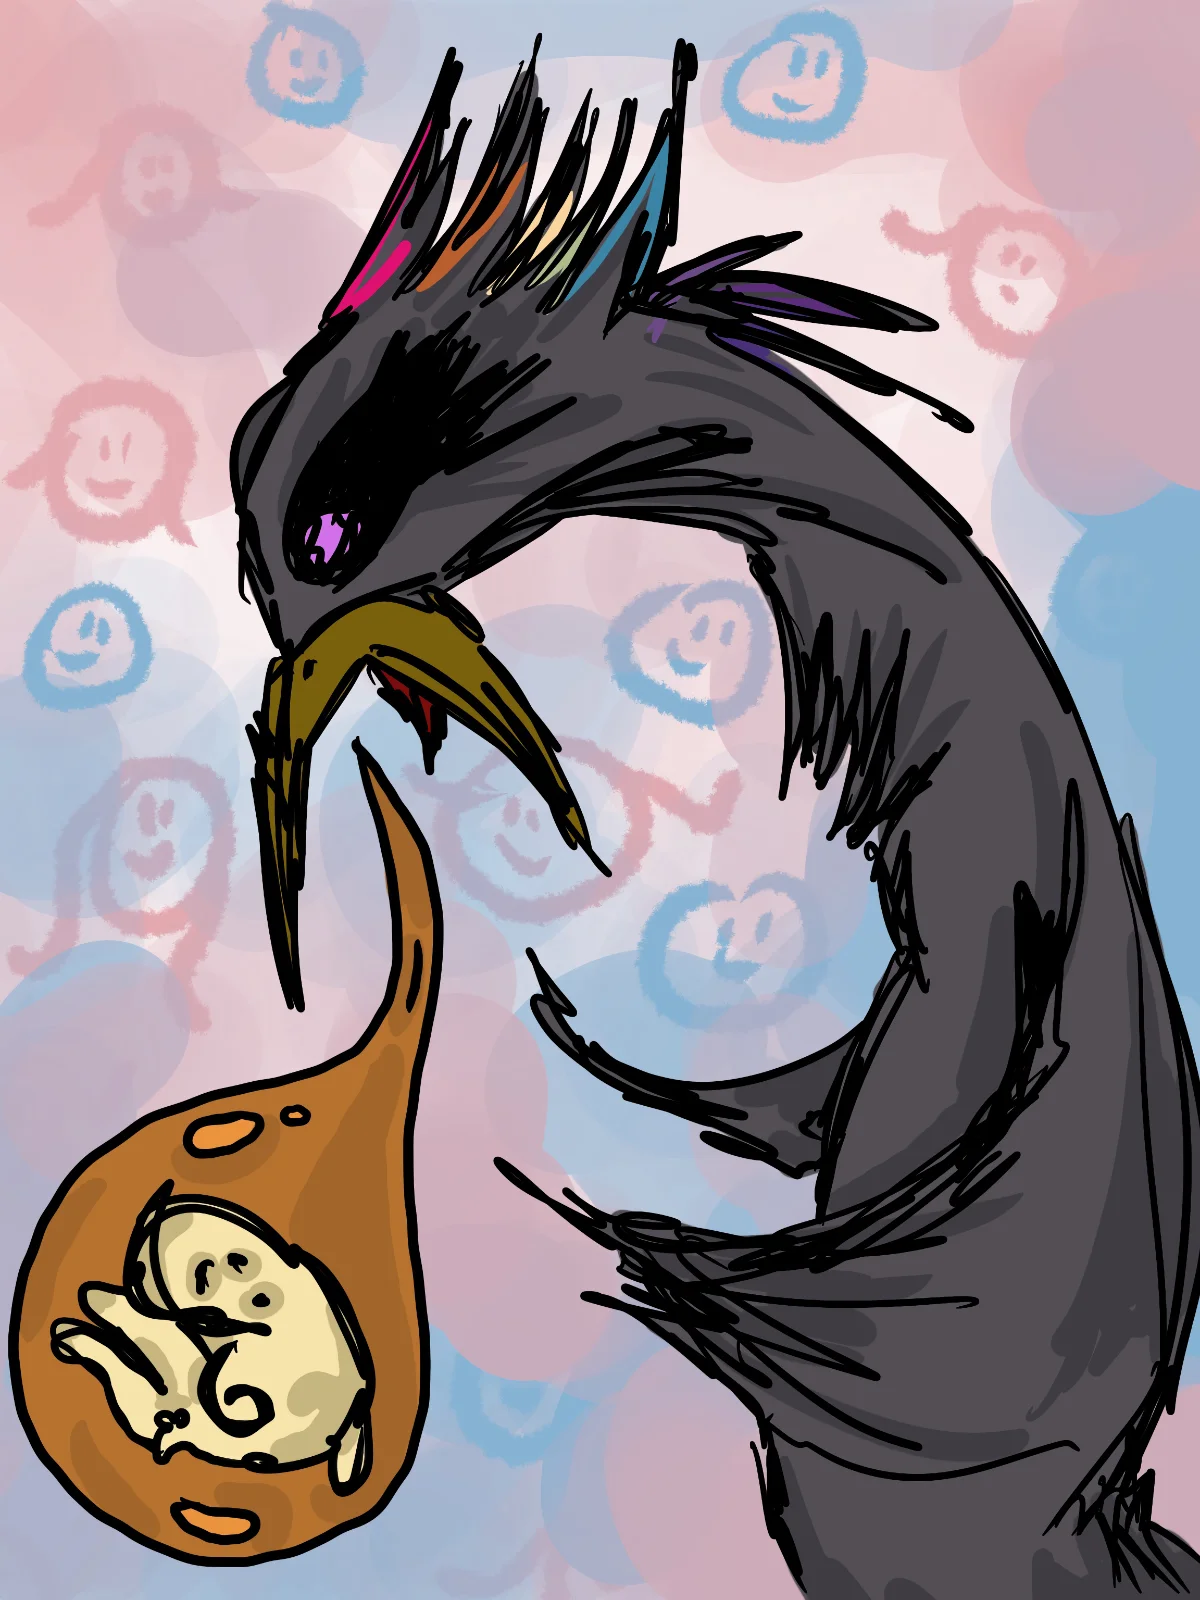 Painting of a scrawny, ruffled black bird with stunted wings coughing up an orangey bubble with a pale yellow fetus-like object incased in the bubble. The black bird has a dark yellow beak that is open and revealing a red tongue. The bird has a pink-purple eye and its crest has red, orange, pale yellow, pale green, blue, and purple highlights. The background is made up of various translucent, round strokes of pale pink and light blue that overlap. There are several round, smiling stick-figure faces in pink and light blue. The pink faces have curved strokes on the side of their faces, indicating long hair.